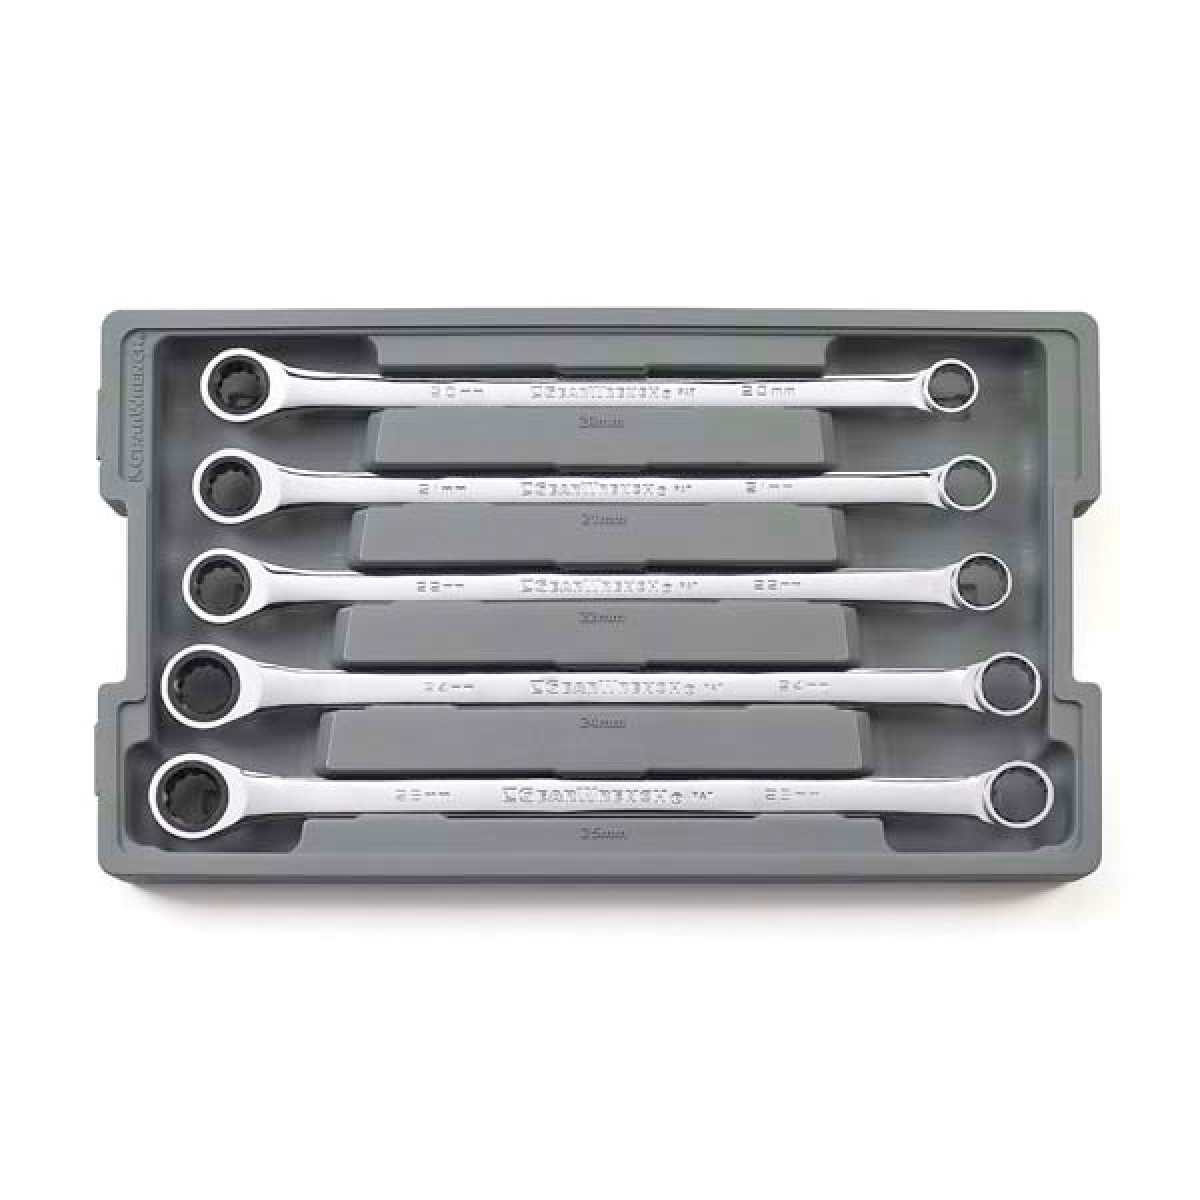 Vmdpw100 5 Piece Metric Double Box Universal Spline Reversible Ratcheting Wrench Set - Extra Large